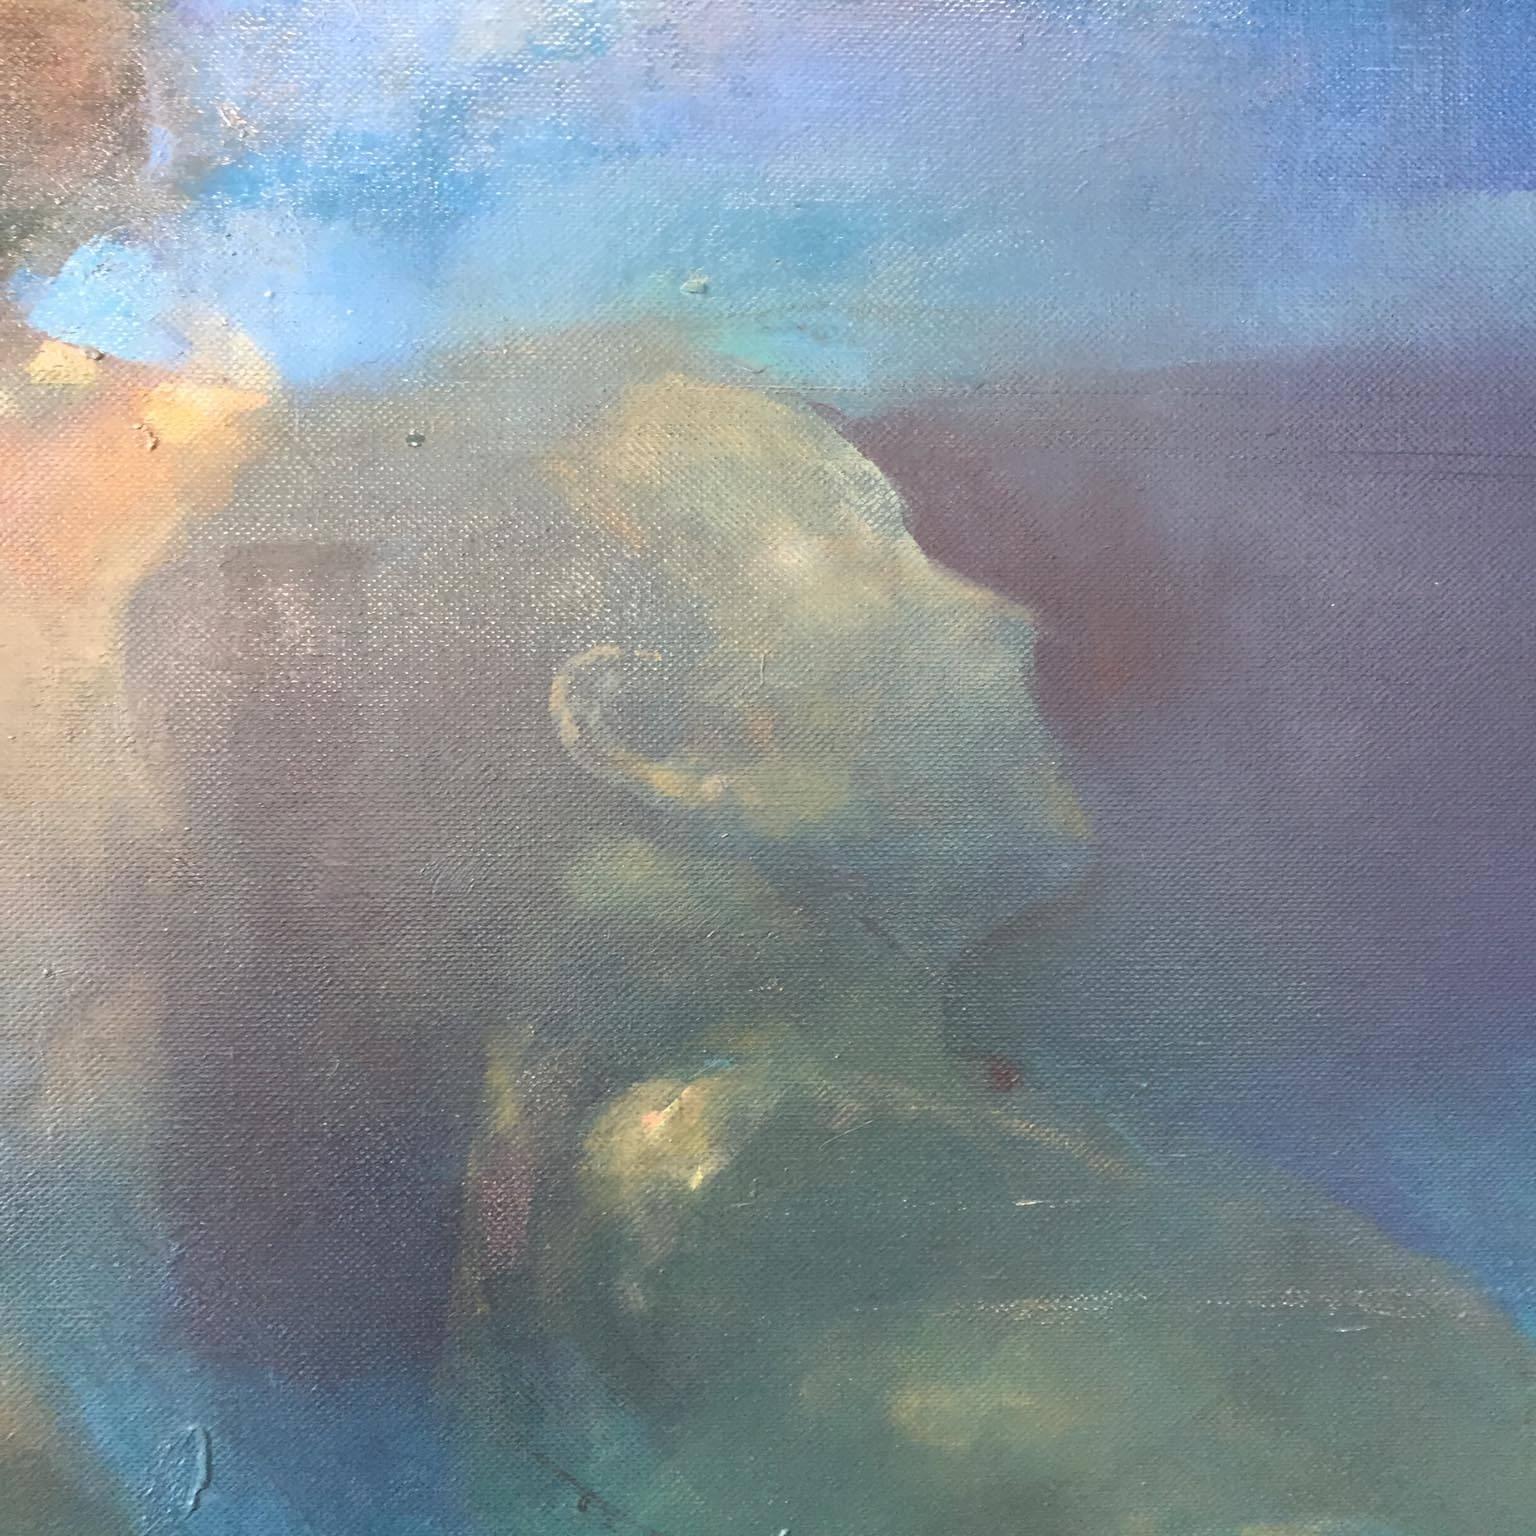 'Morphosis II' has been painted by the artist, Bill Bate, using oil paint on canvas. 

This painting started out as a single figure but has been heavily reworked evolving into a scene depicting two bodies. The emphasis is on the different aspects of